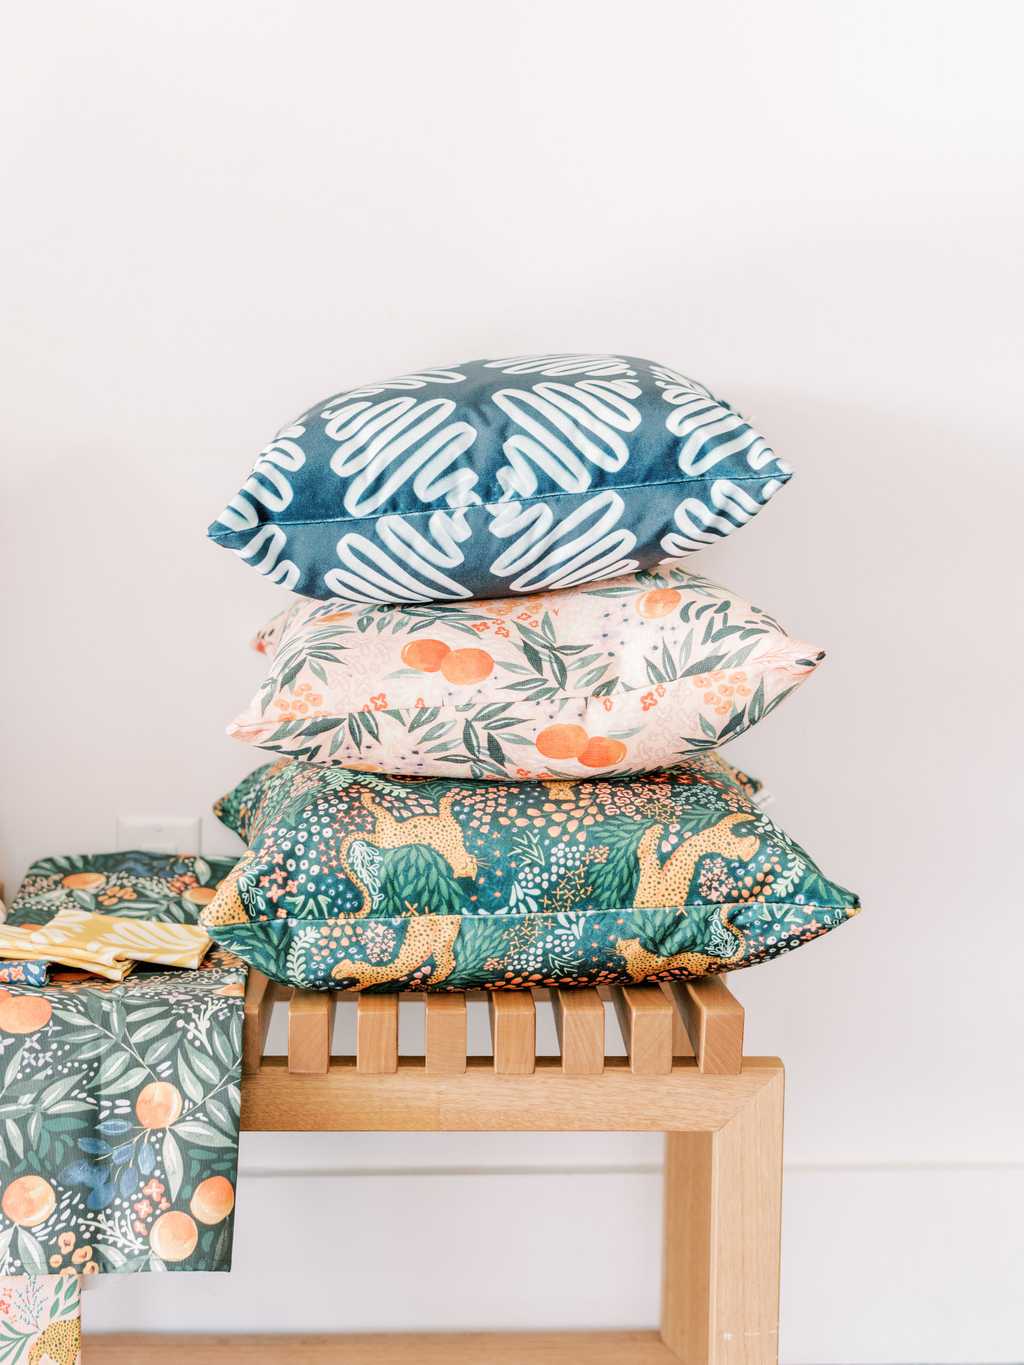 patterned throw pillows and fabric